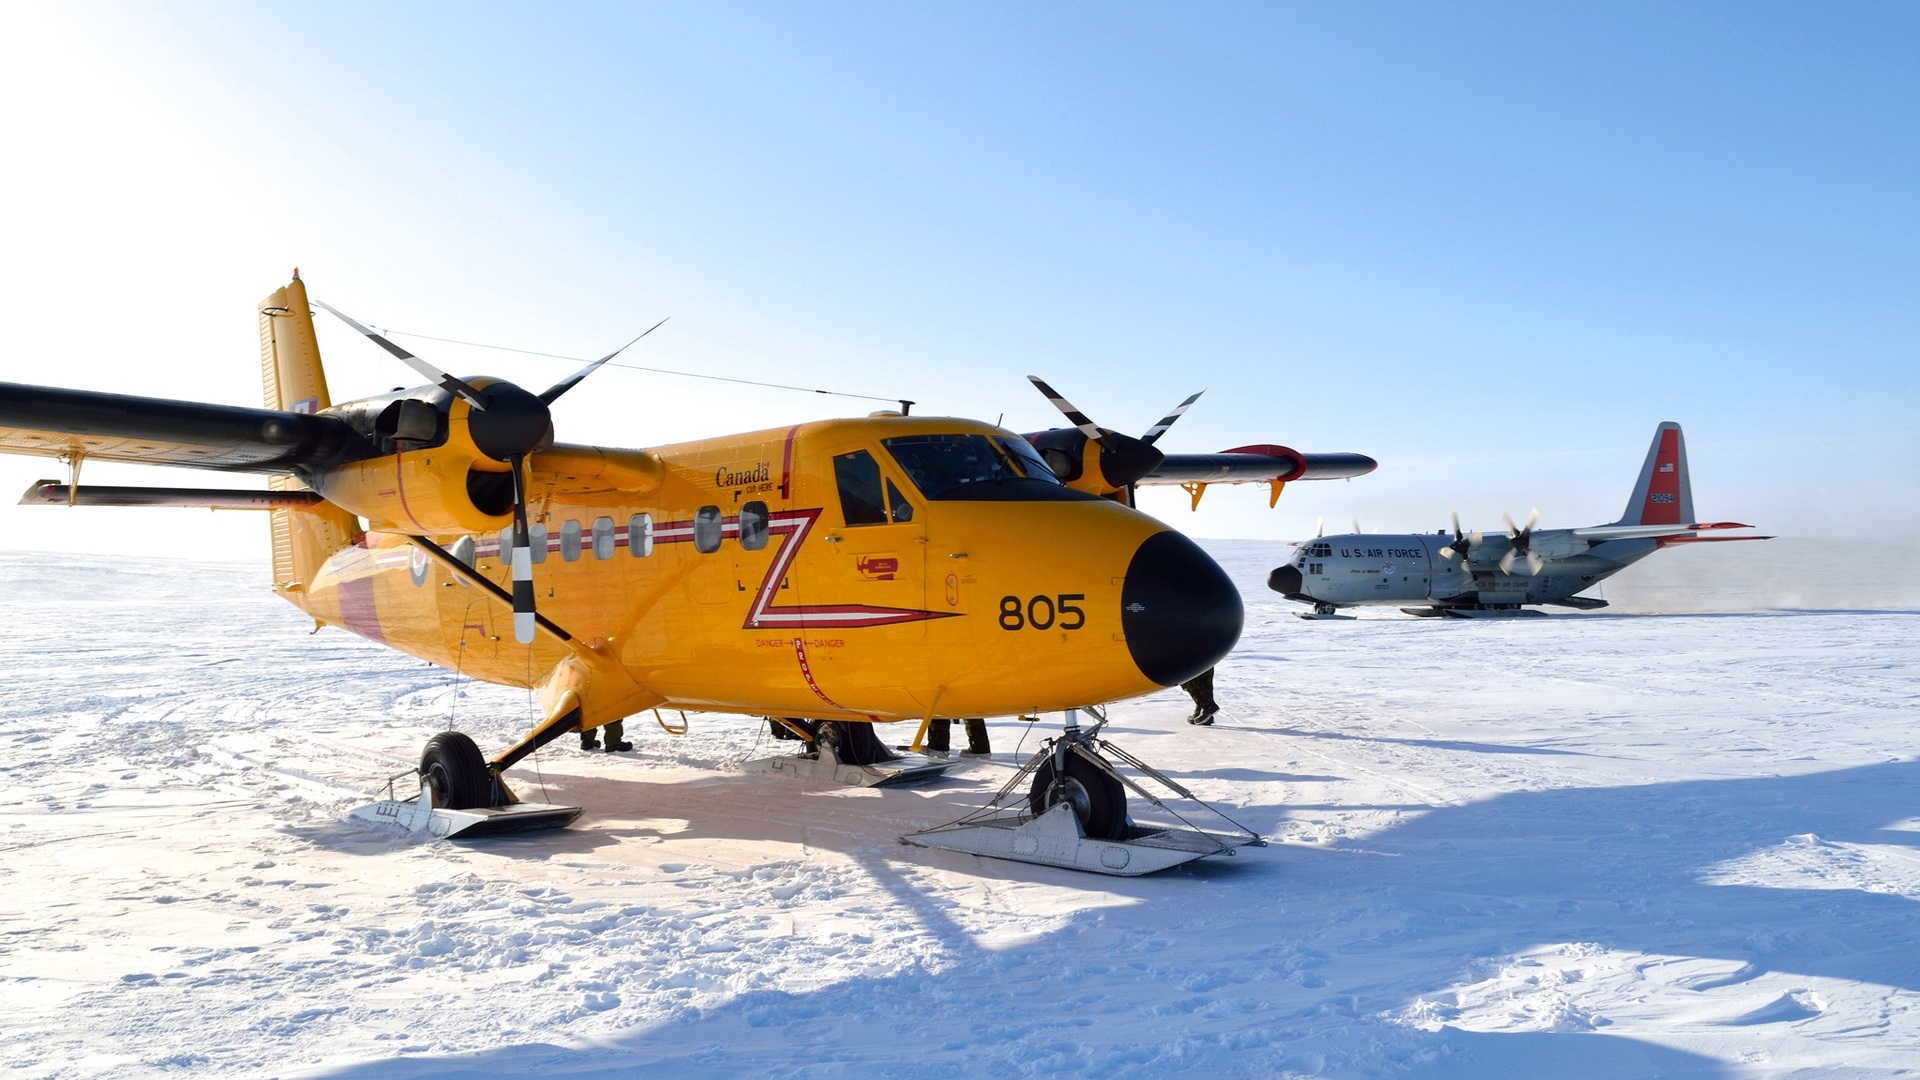 General 1920x1080 airplane aircraft winter snow nature sunlight daylight sky sky blue clear sky vehicle numbers